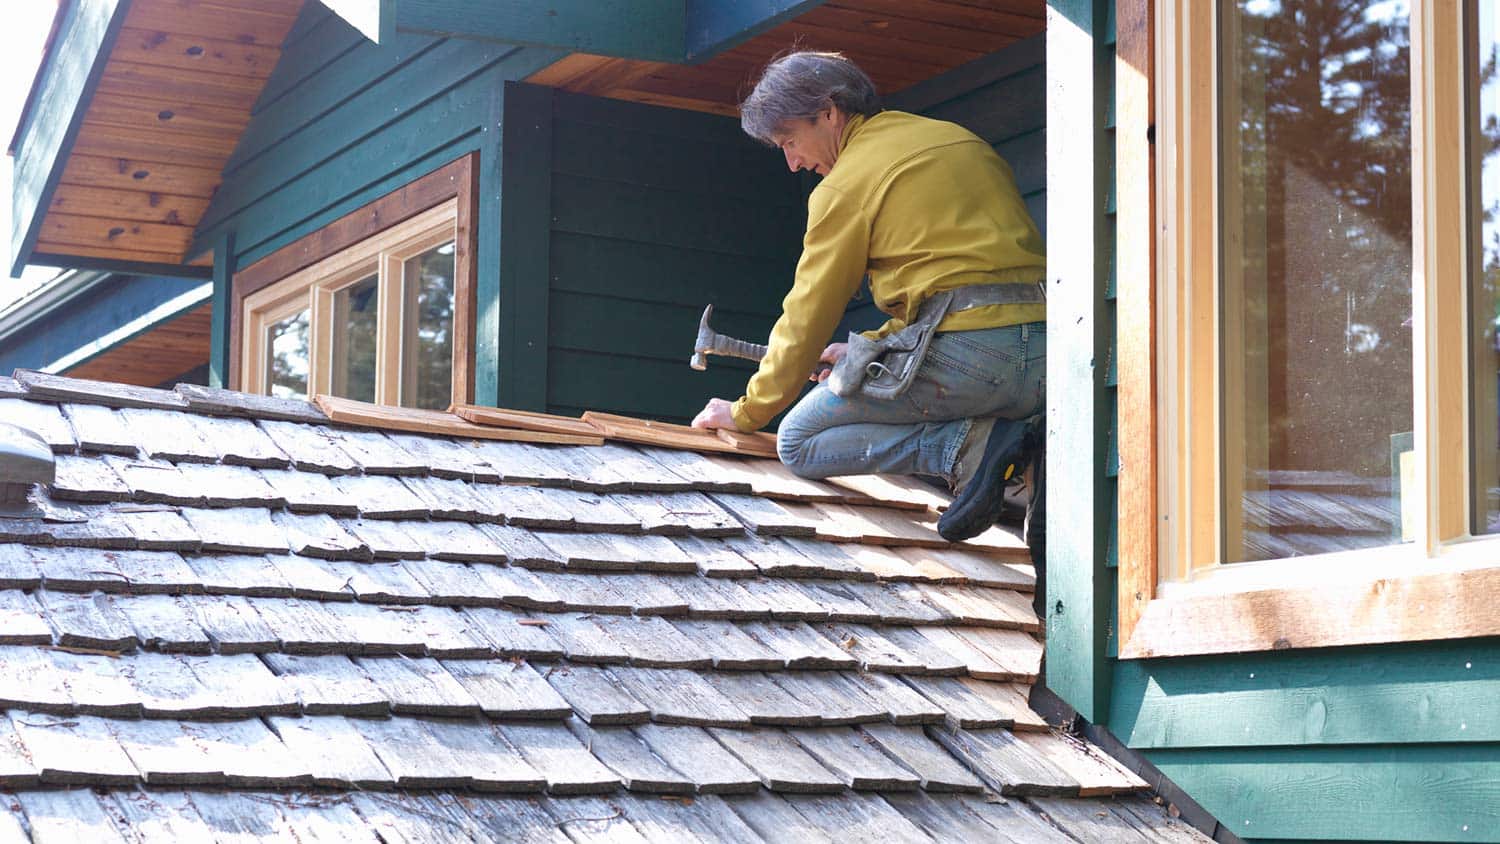 What Tools Do You Need to Fix Your Roof?